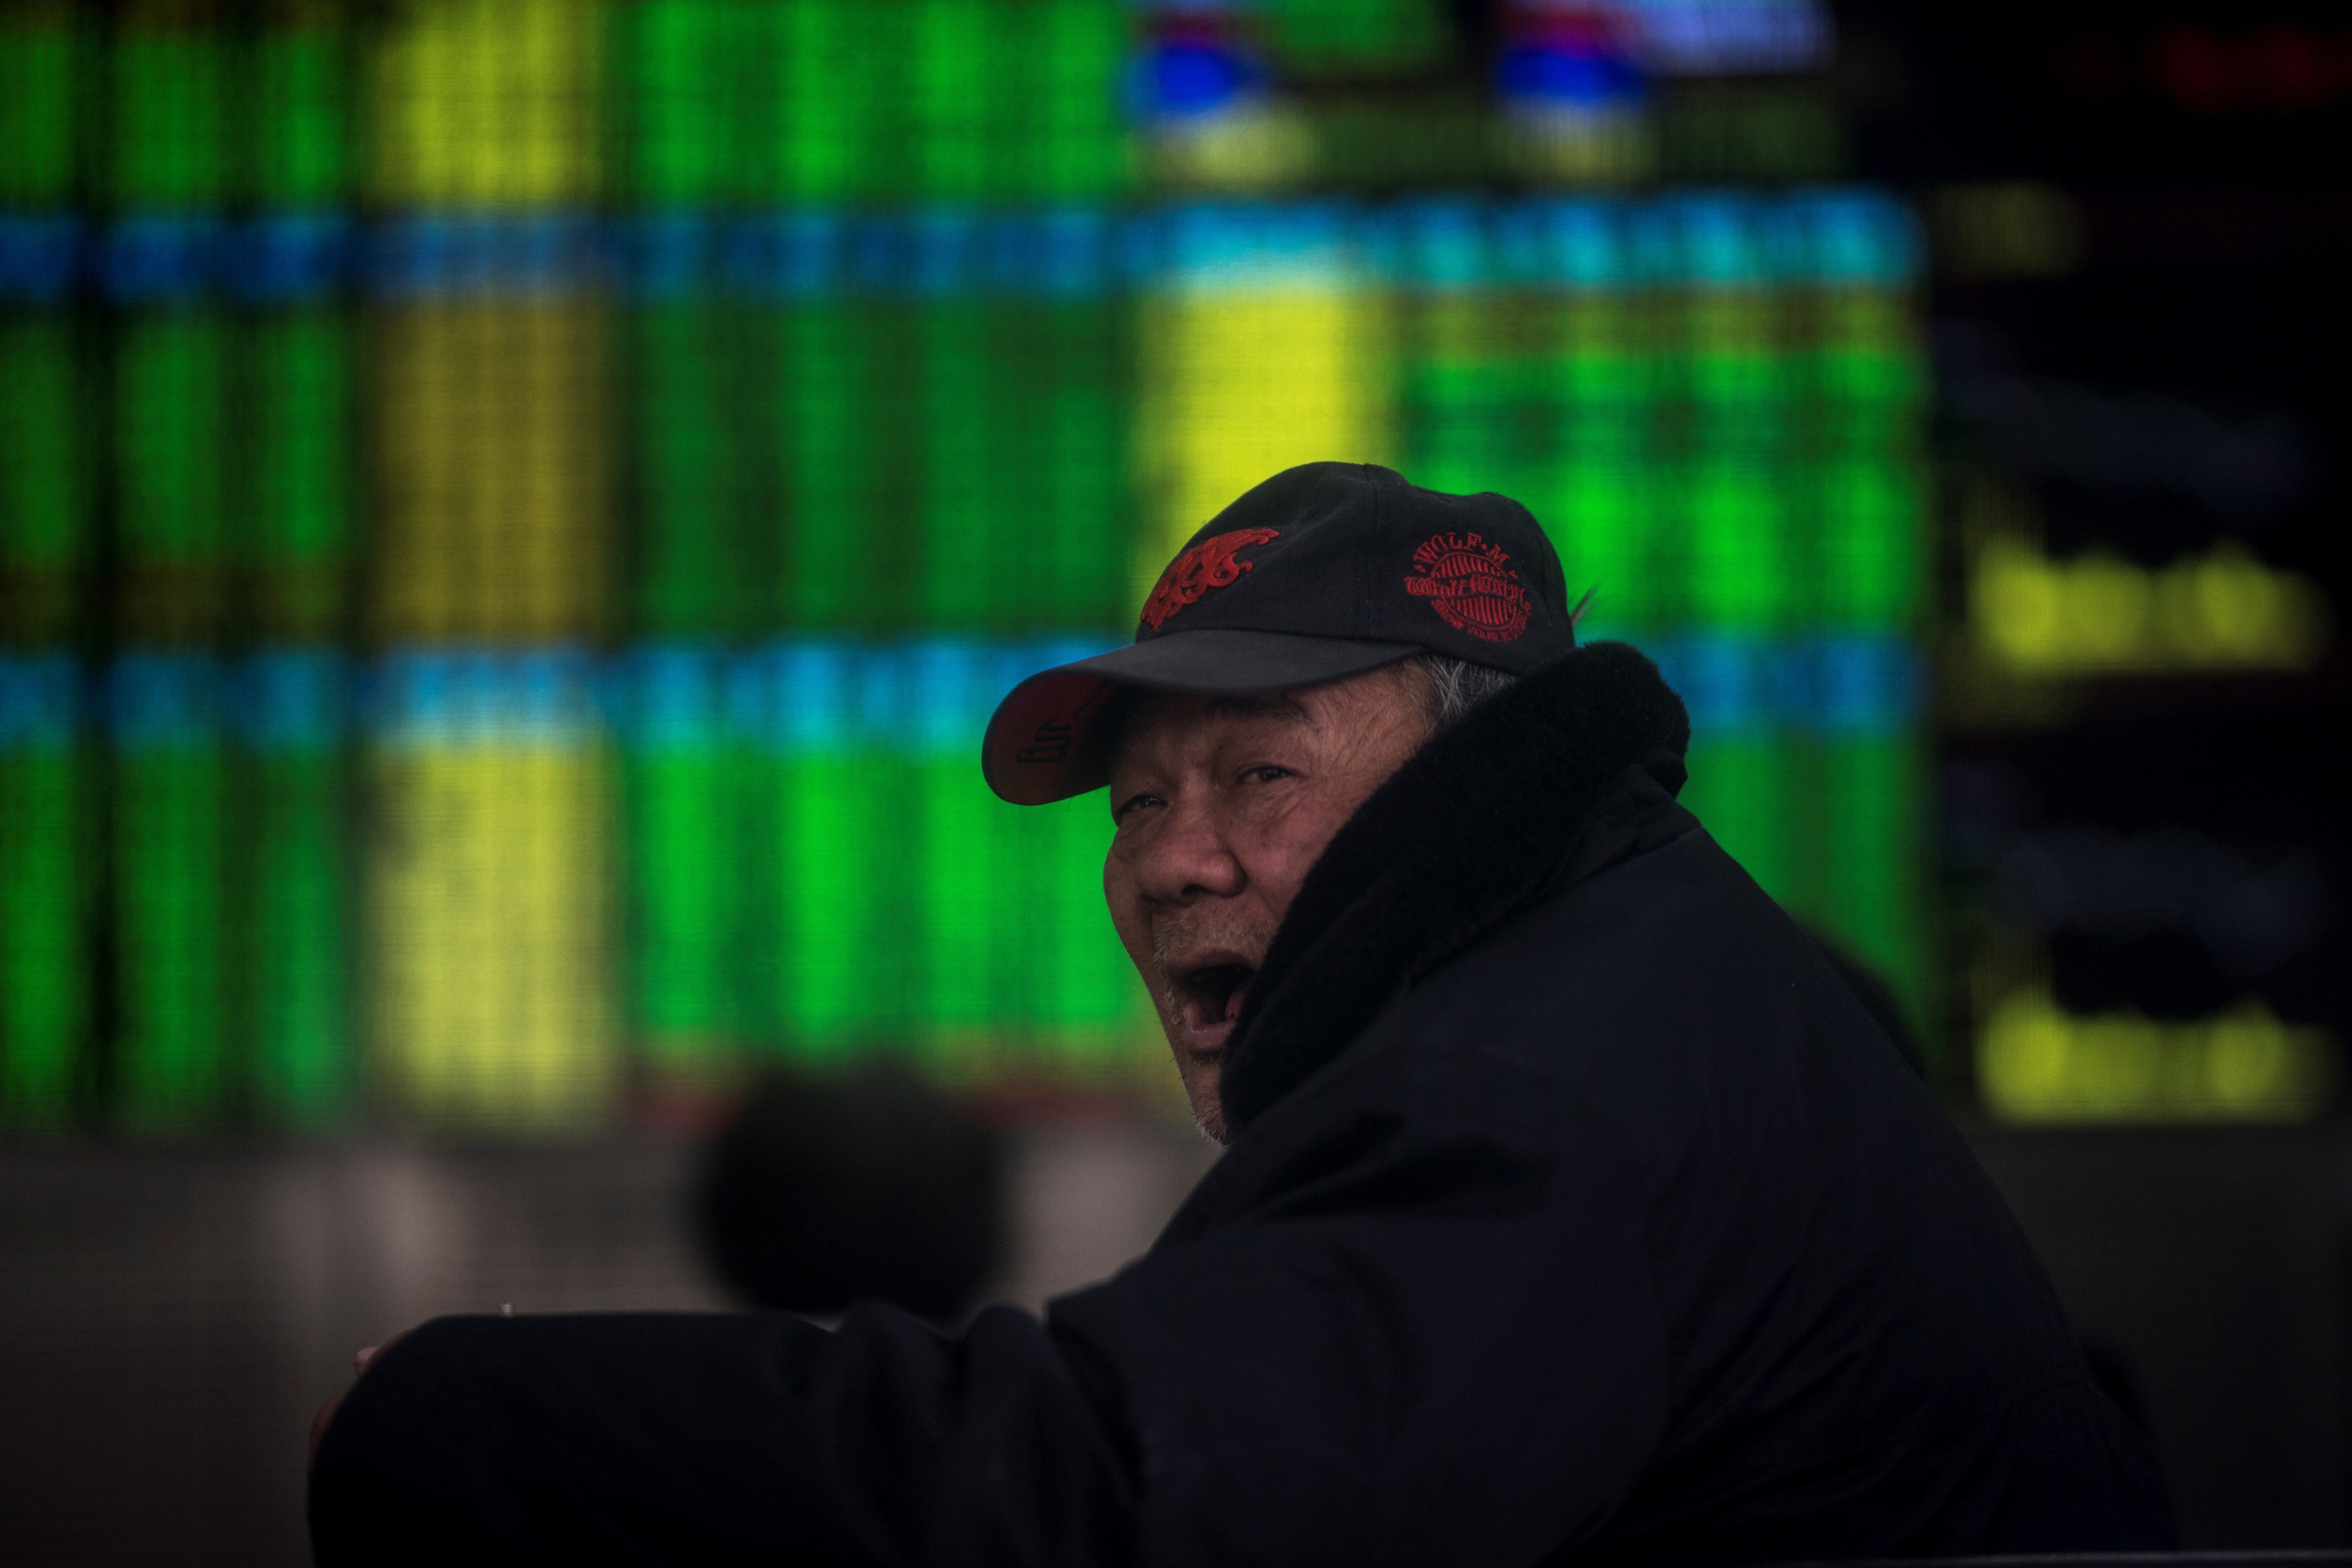 An investor reacts while keeping an eye on stock price movements in Shanghai. Photo: AFP